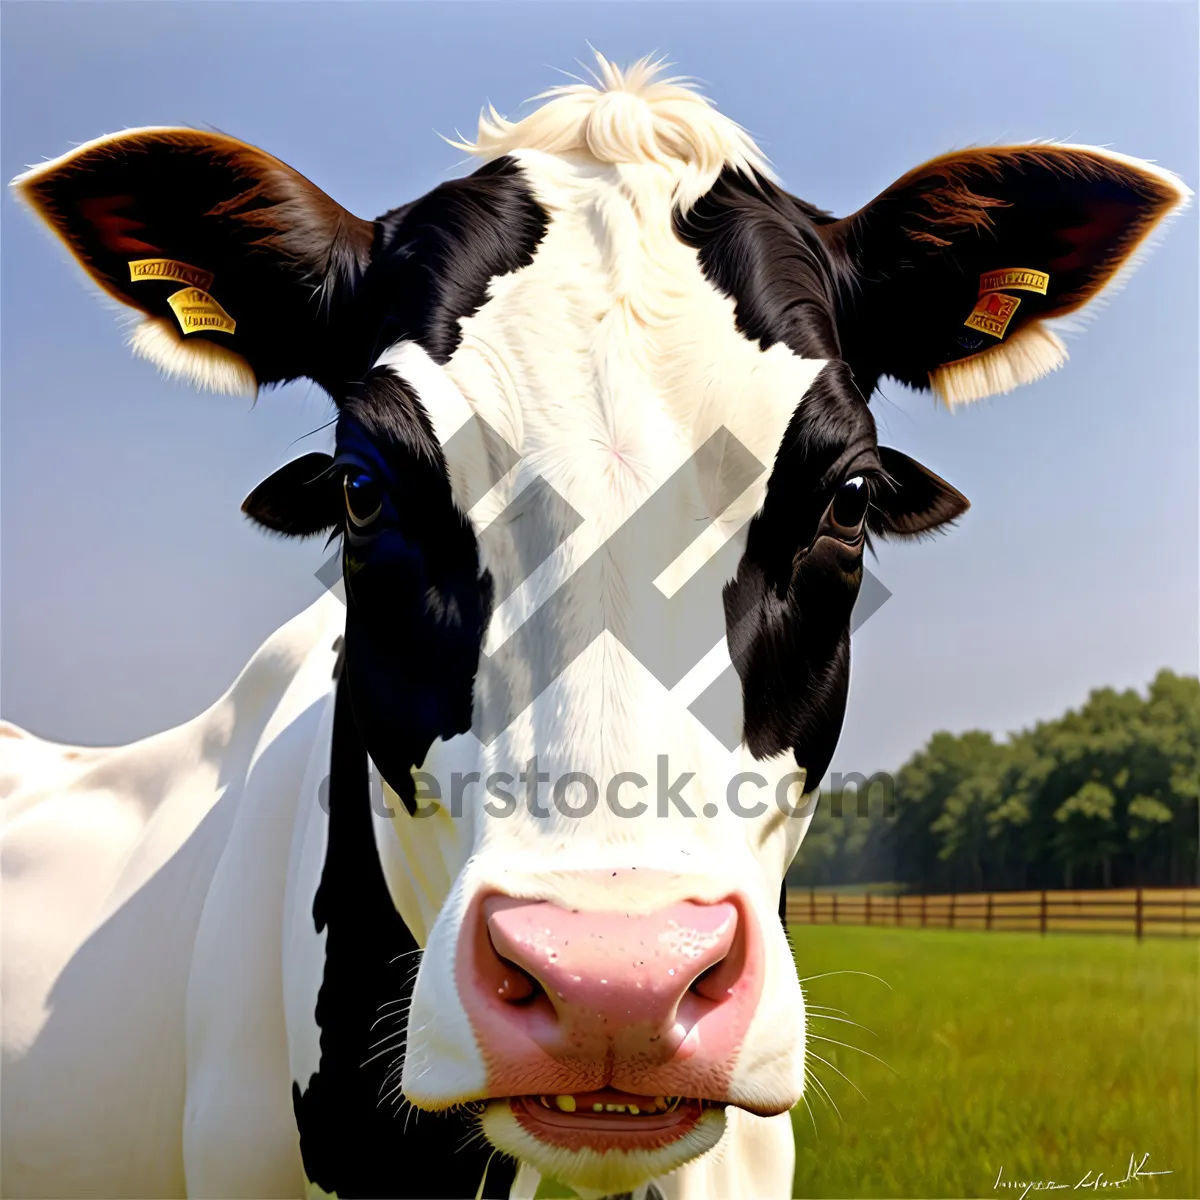 Picture of Grass-fed Cattle Grazing on Farm Pasture